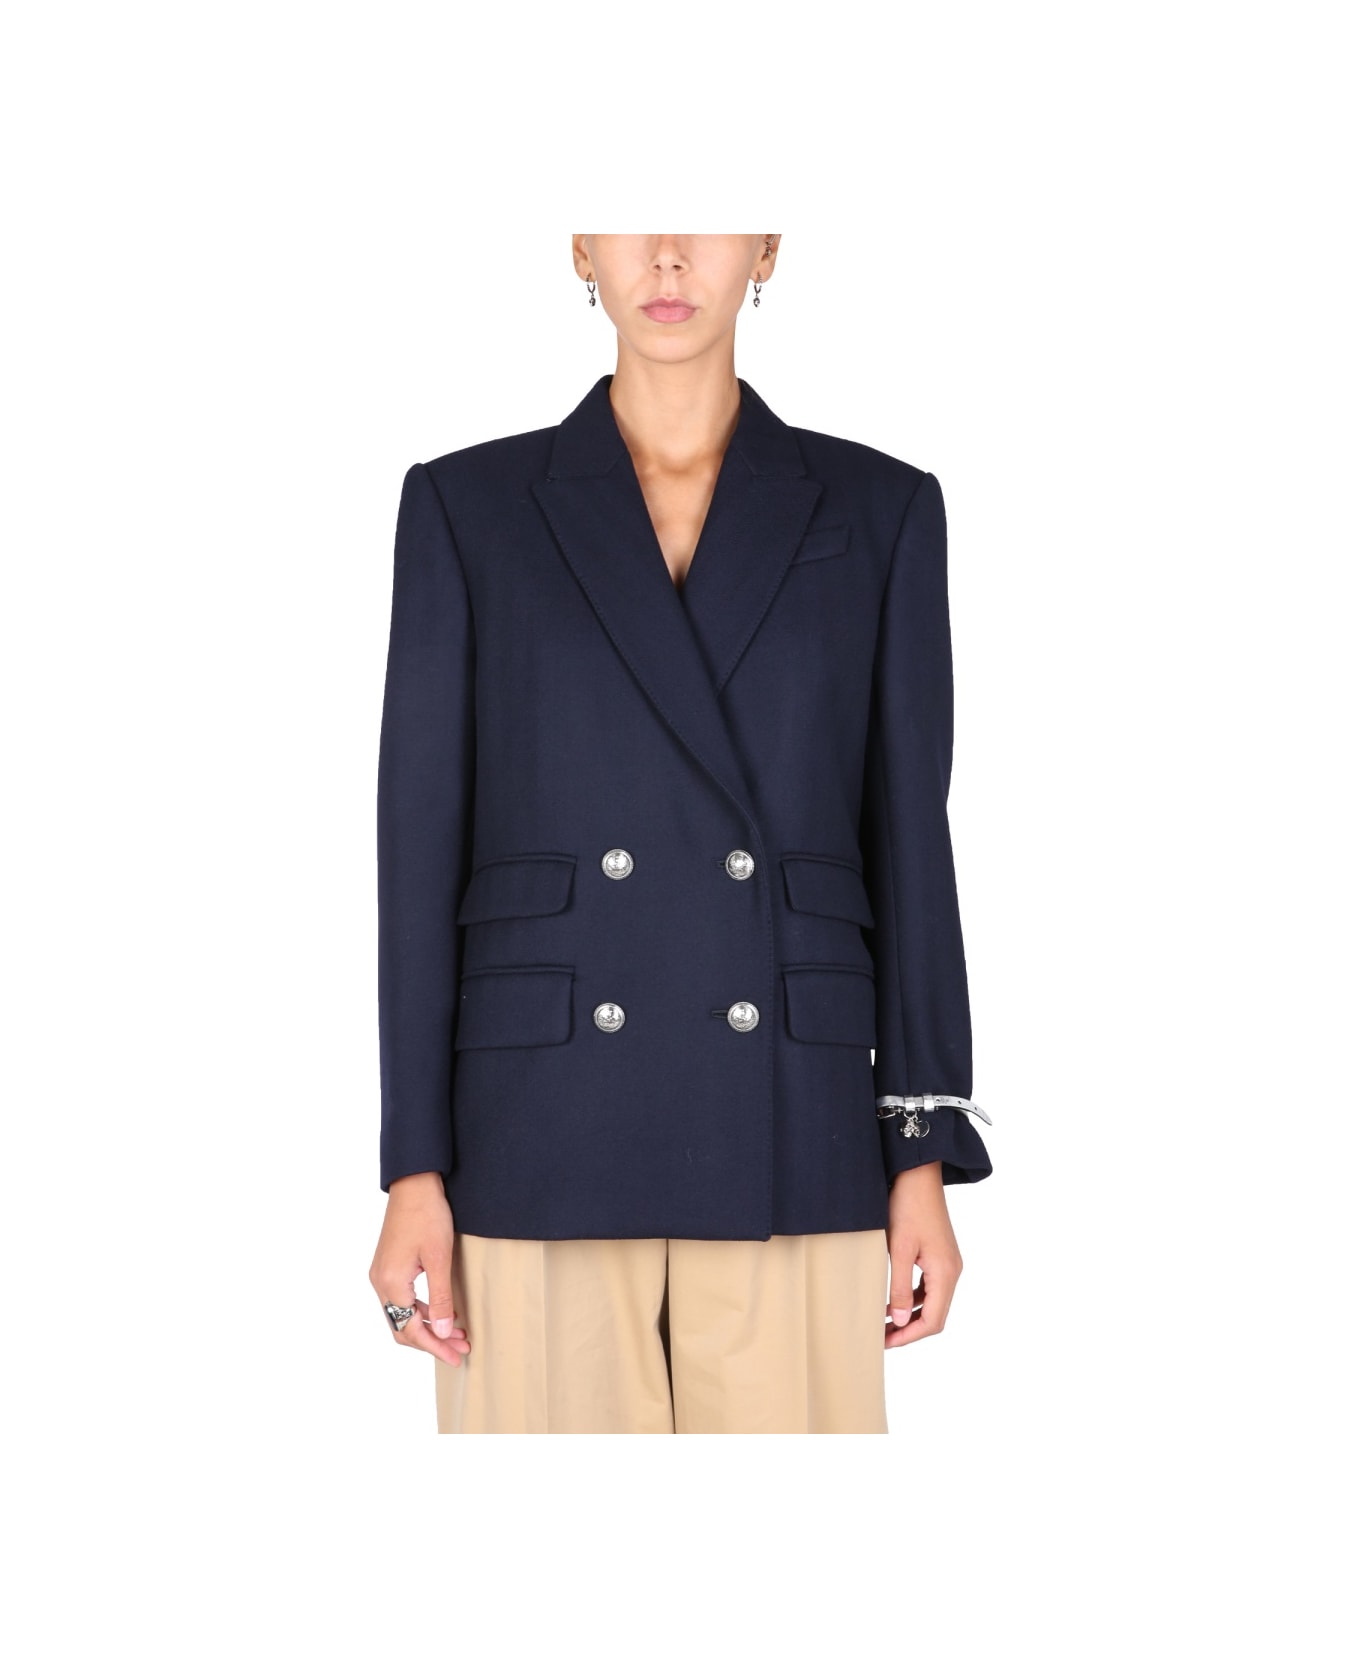 Alexander McQueen Double-breasted Jacket - BLUE